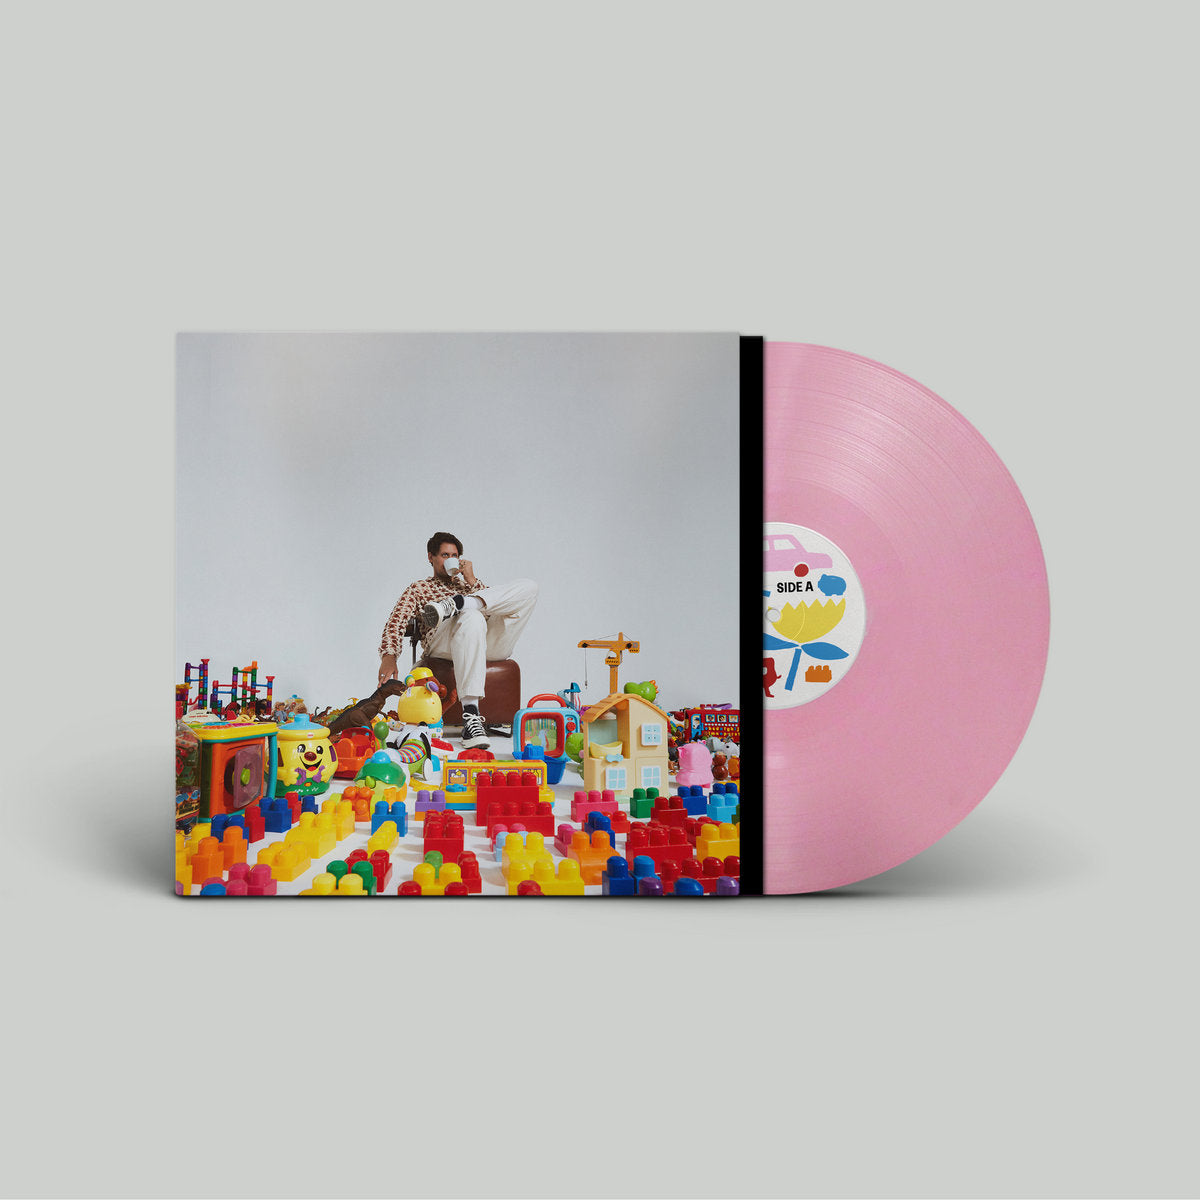 Barry Can’t Swim - When Will We Land? Signed Limited 'Flamingo Pink' Vinyl LP